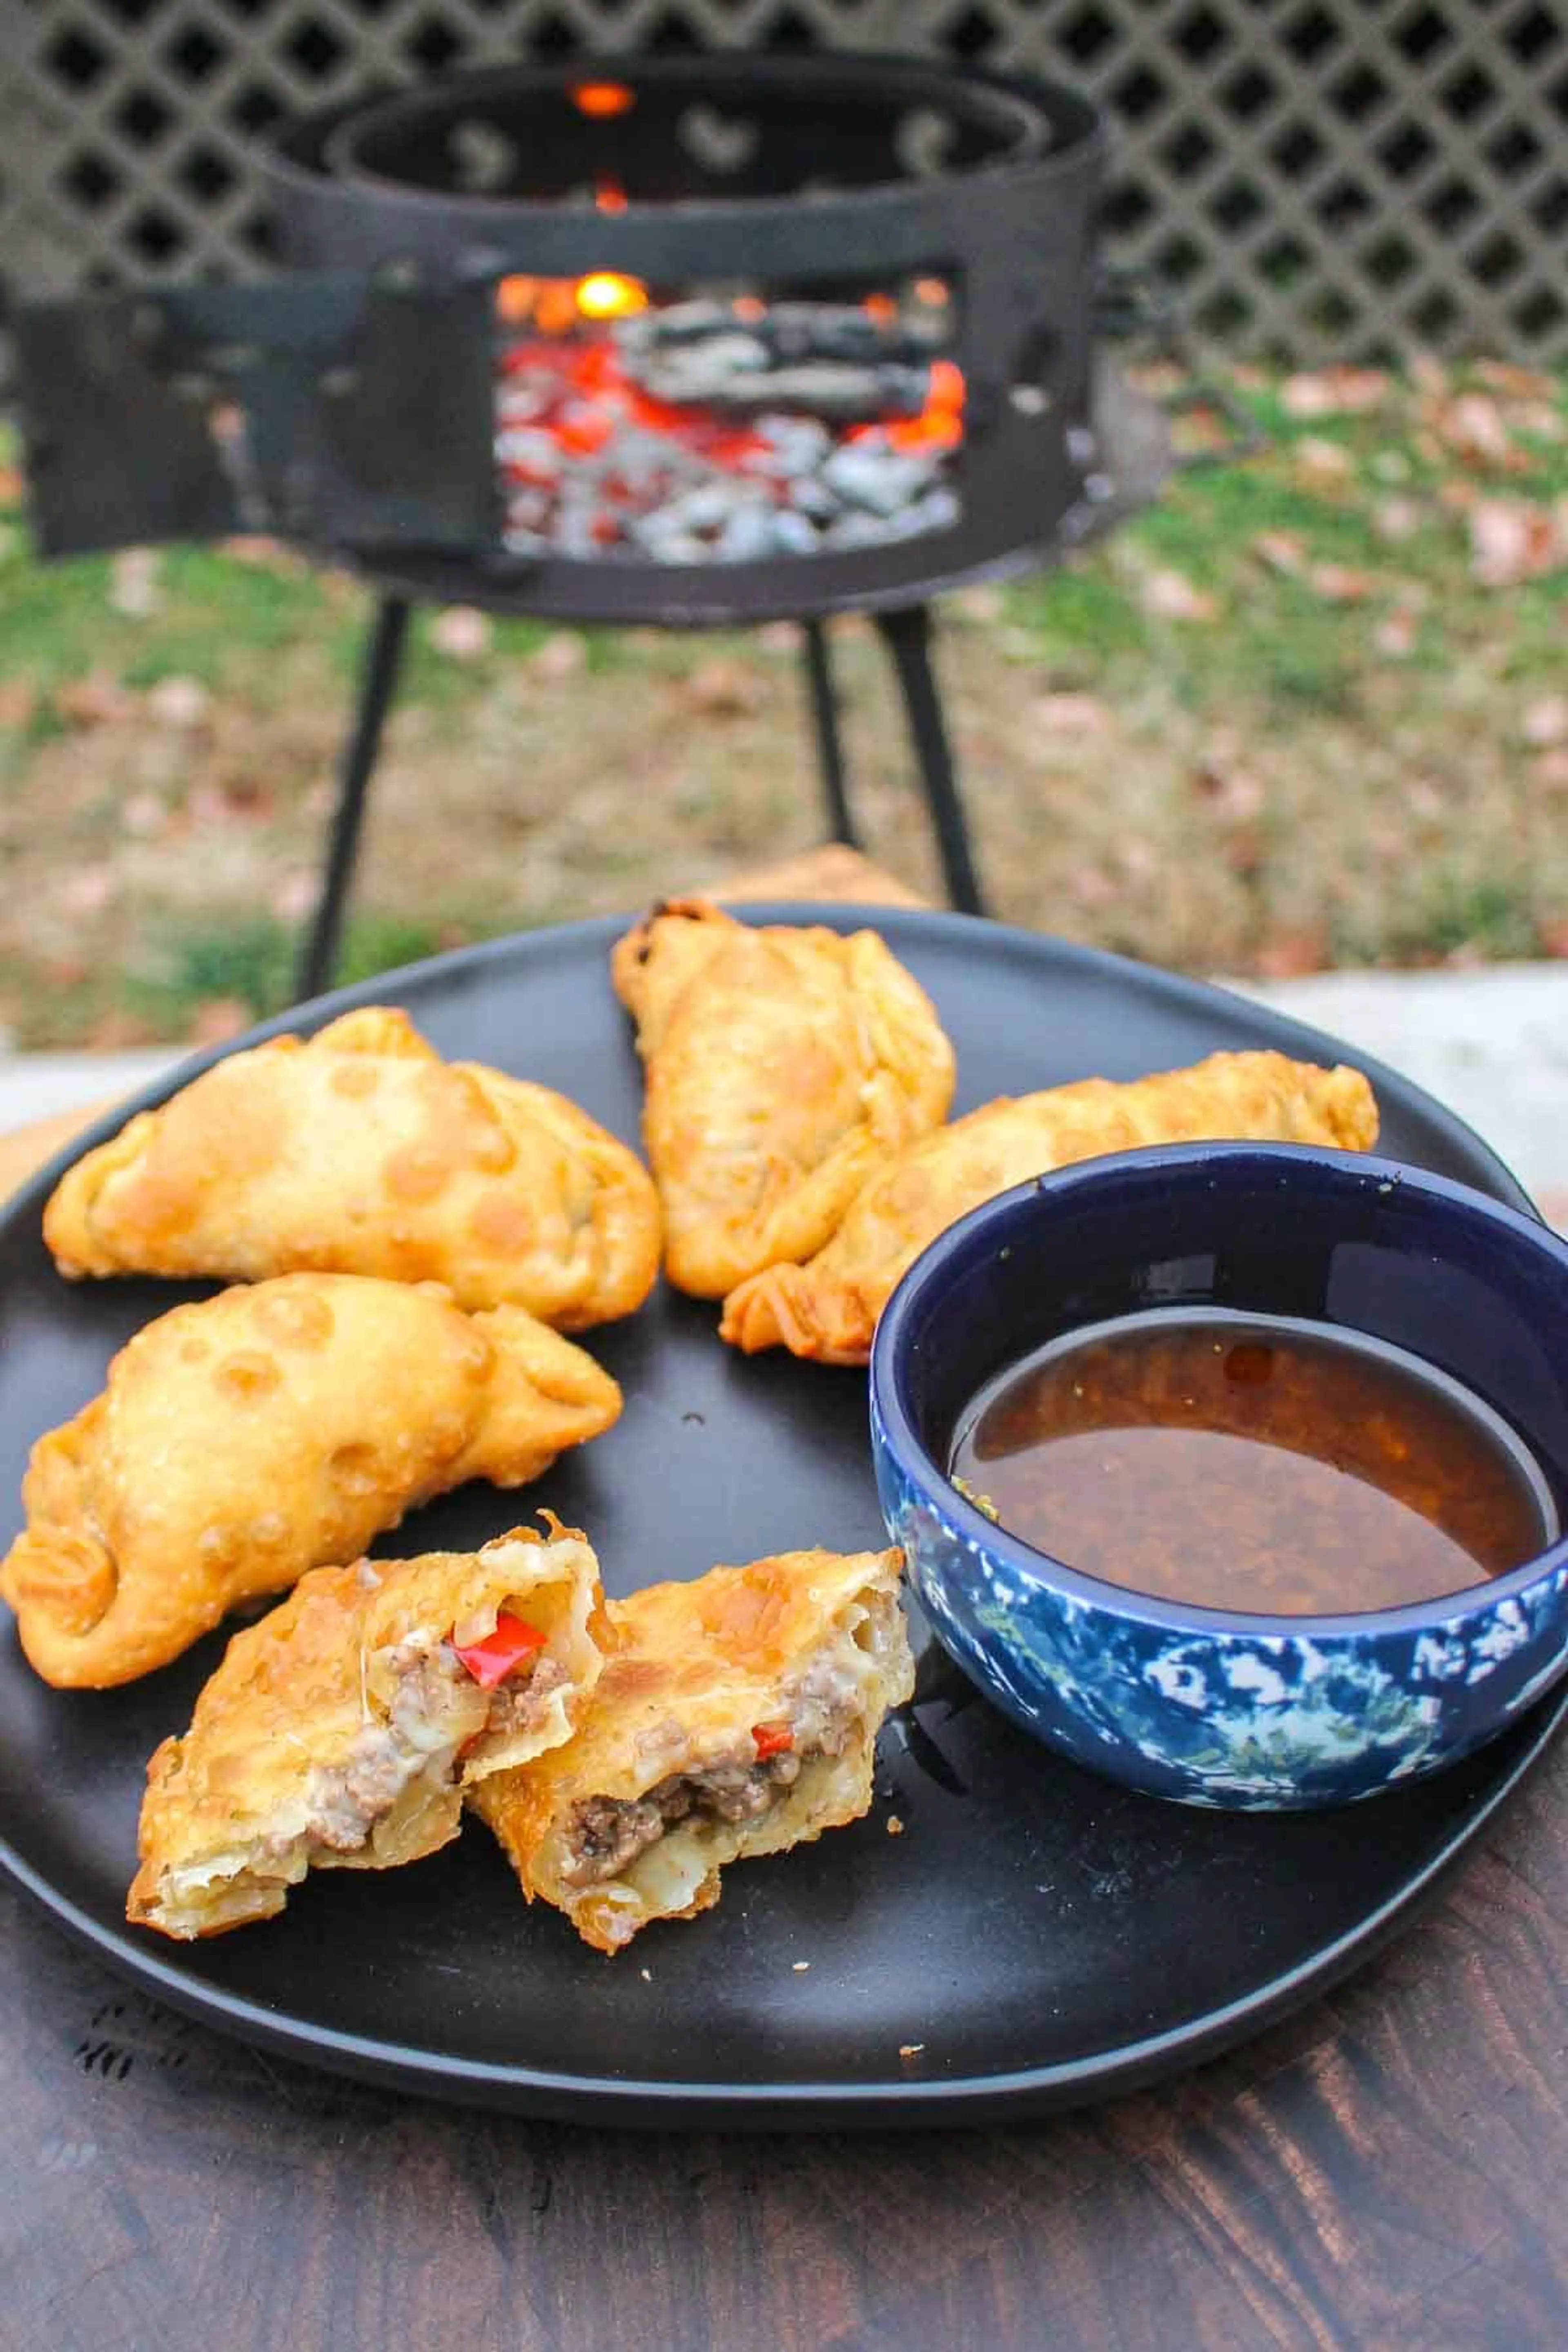 Beef and Cheese Empanadas